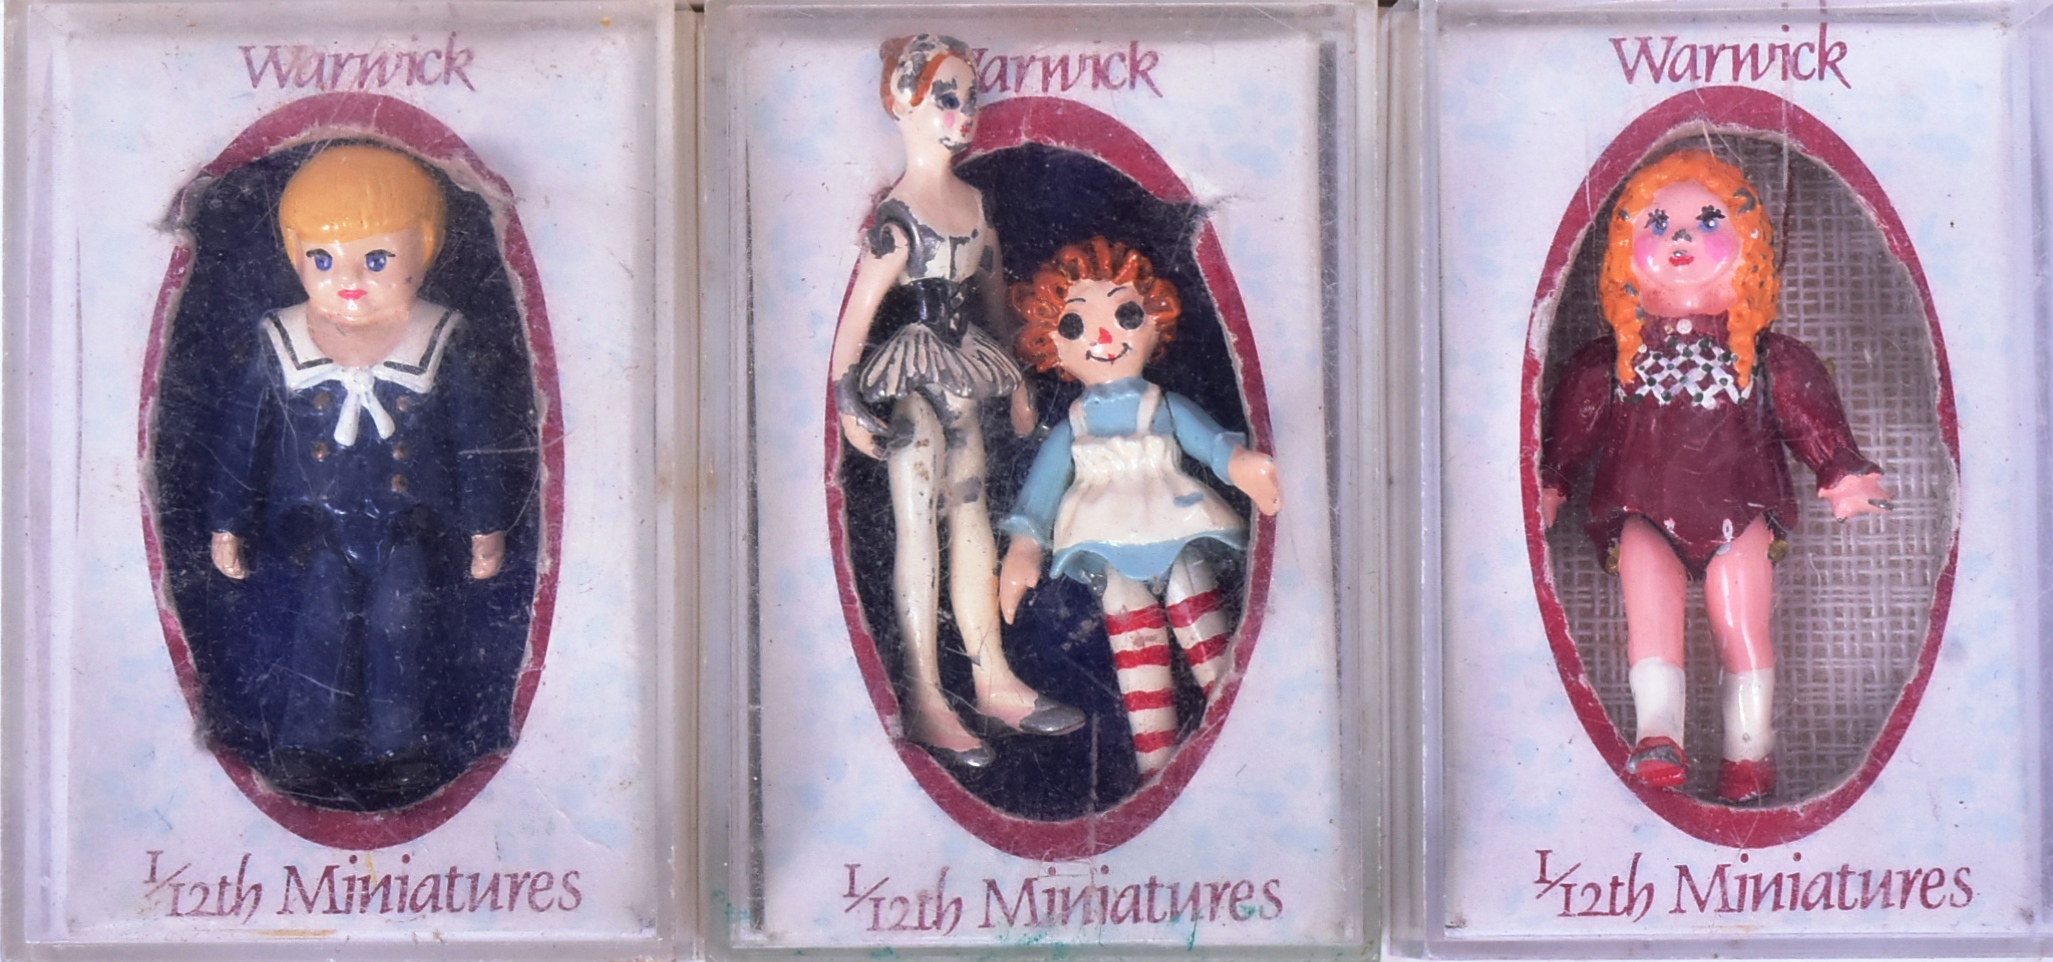 WARWICK MINIATURES - COLLECTION OF 1/12 SCALE SCALE DOLLS - Image 4 of 4